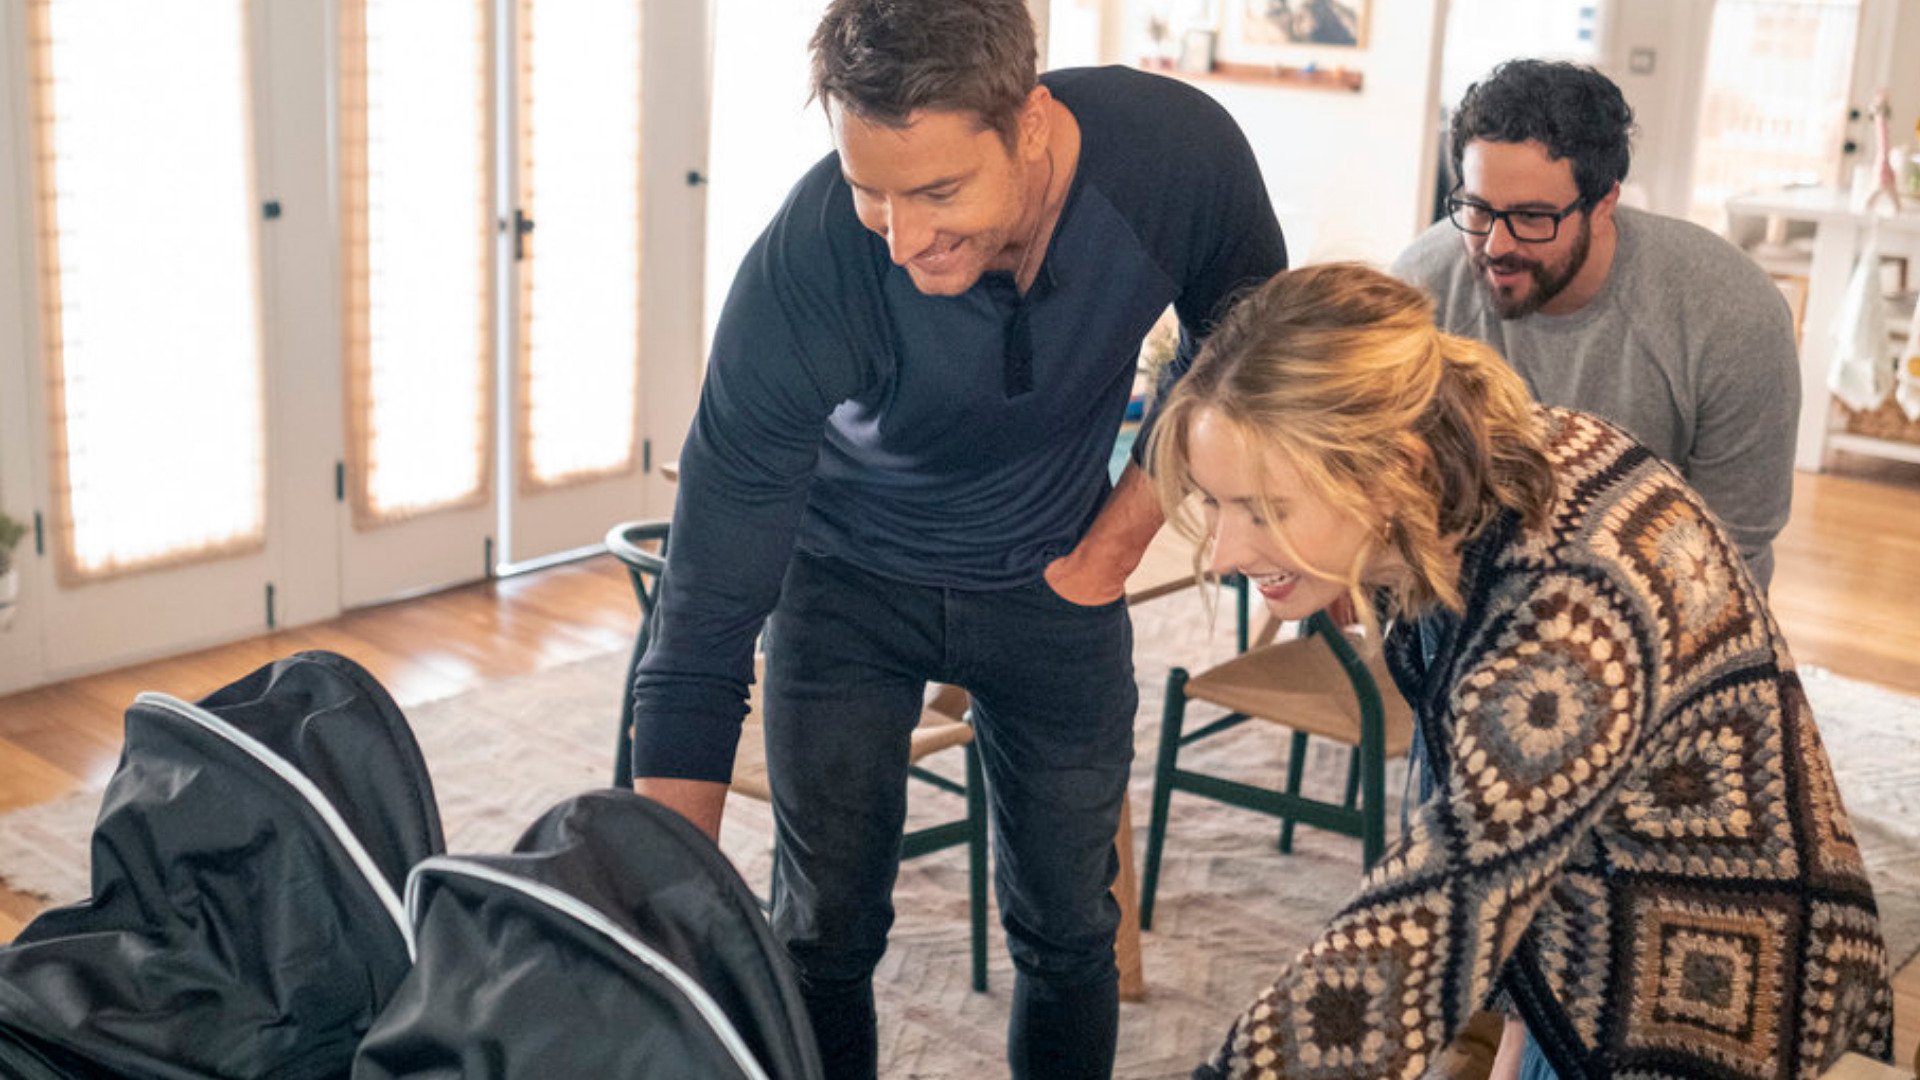 Justin Hartley as Kevin, Adam Korson as Elijah, and Caitlin Thompson as Madison looking at twins Franny and Nicky in ‘This Is Us’ Season 6 Episode 5